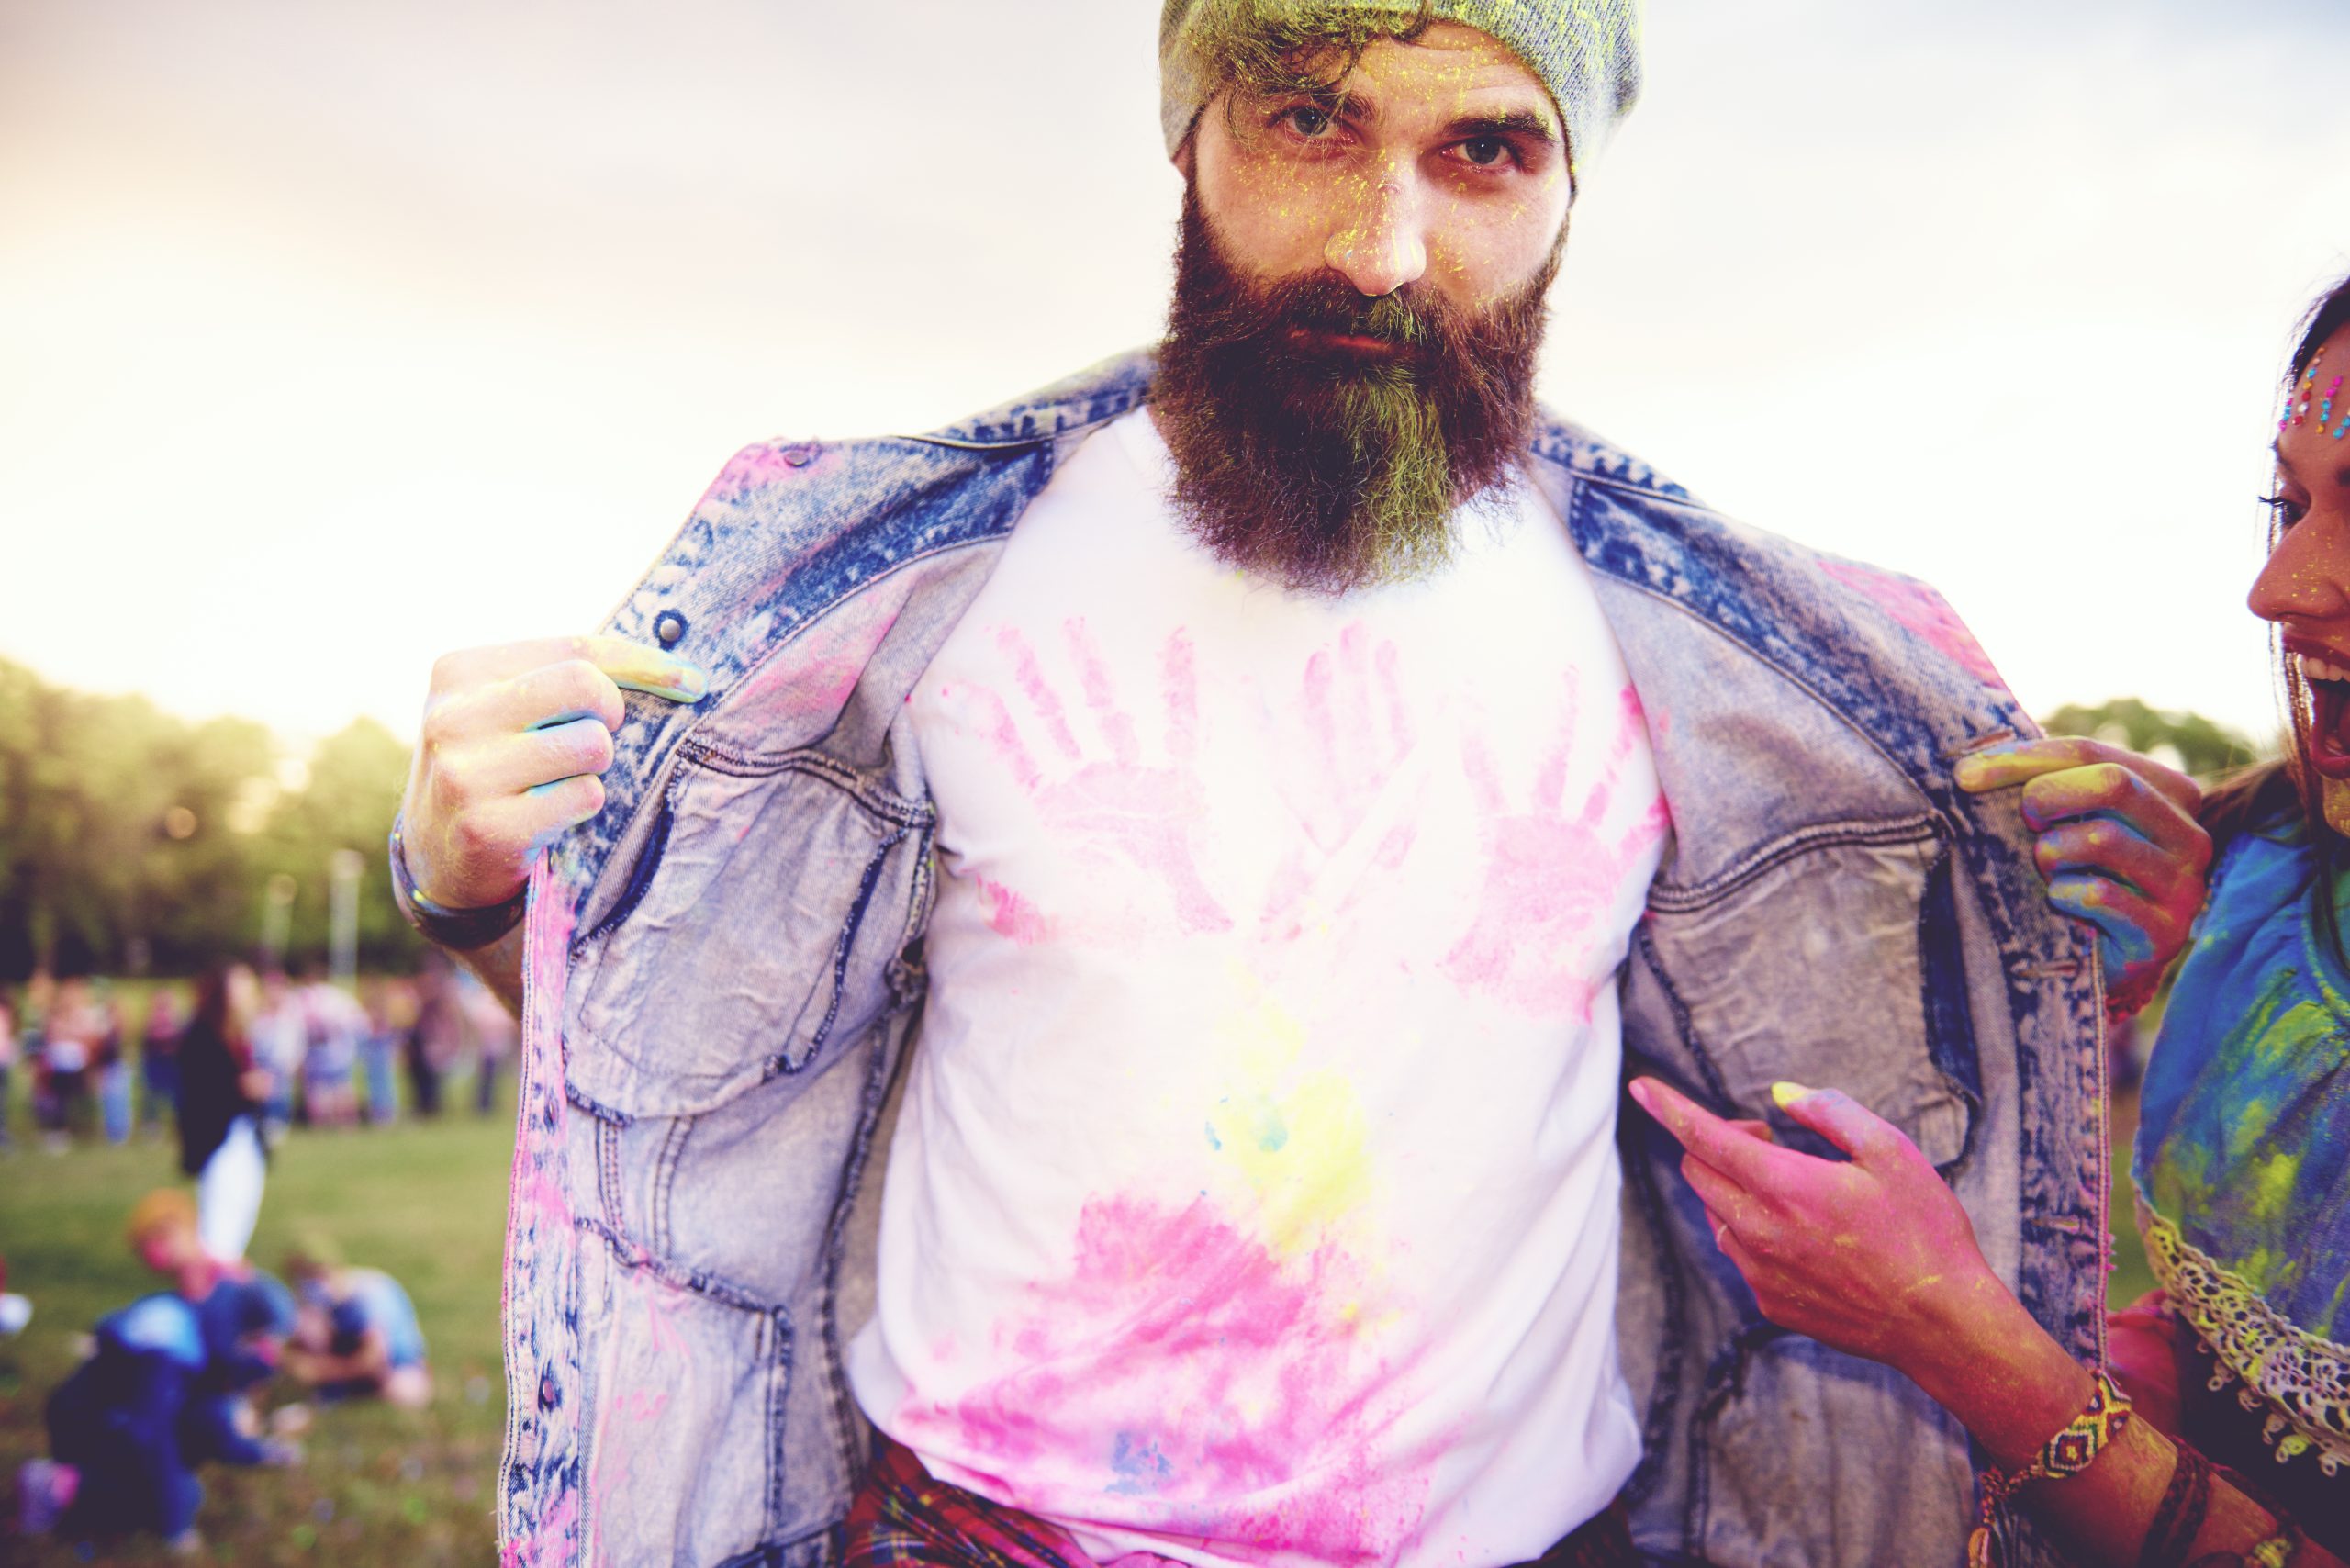 Portrait of young male hipster with chalk handprints on tshirt at festival